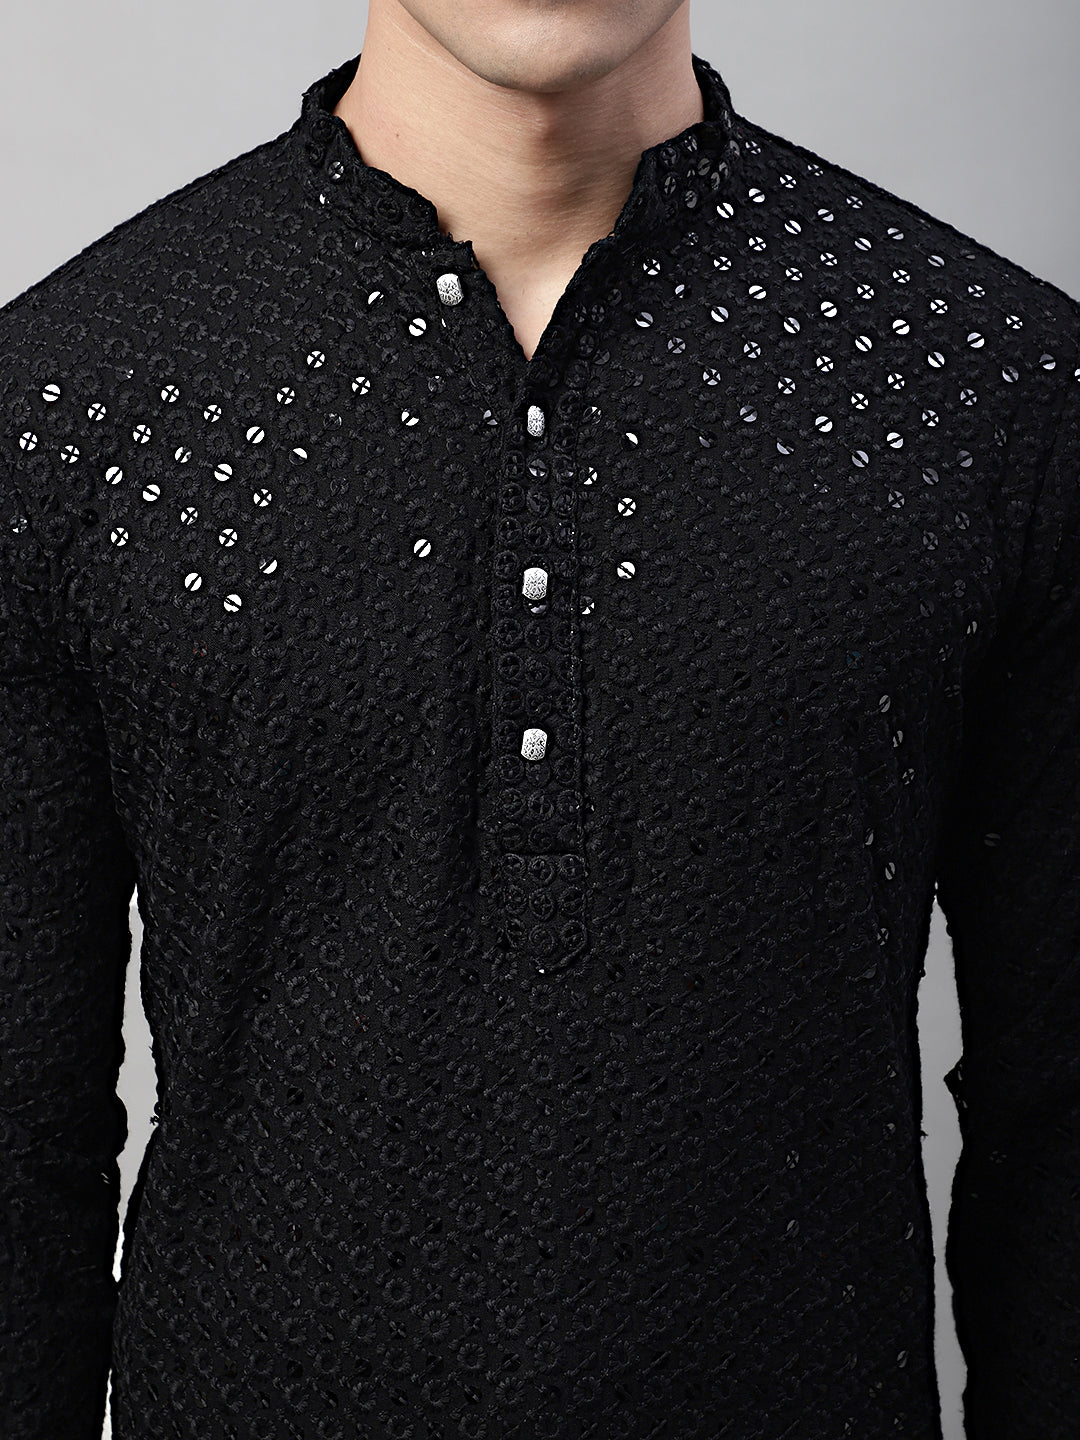 Men Black Chikankari Embroidered and Sequence Kurta Only